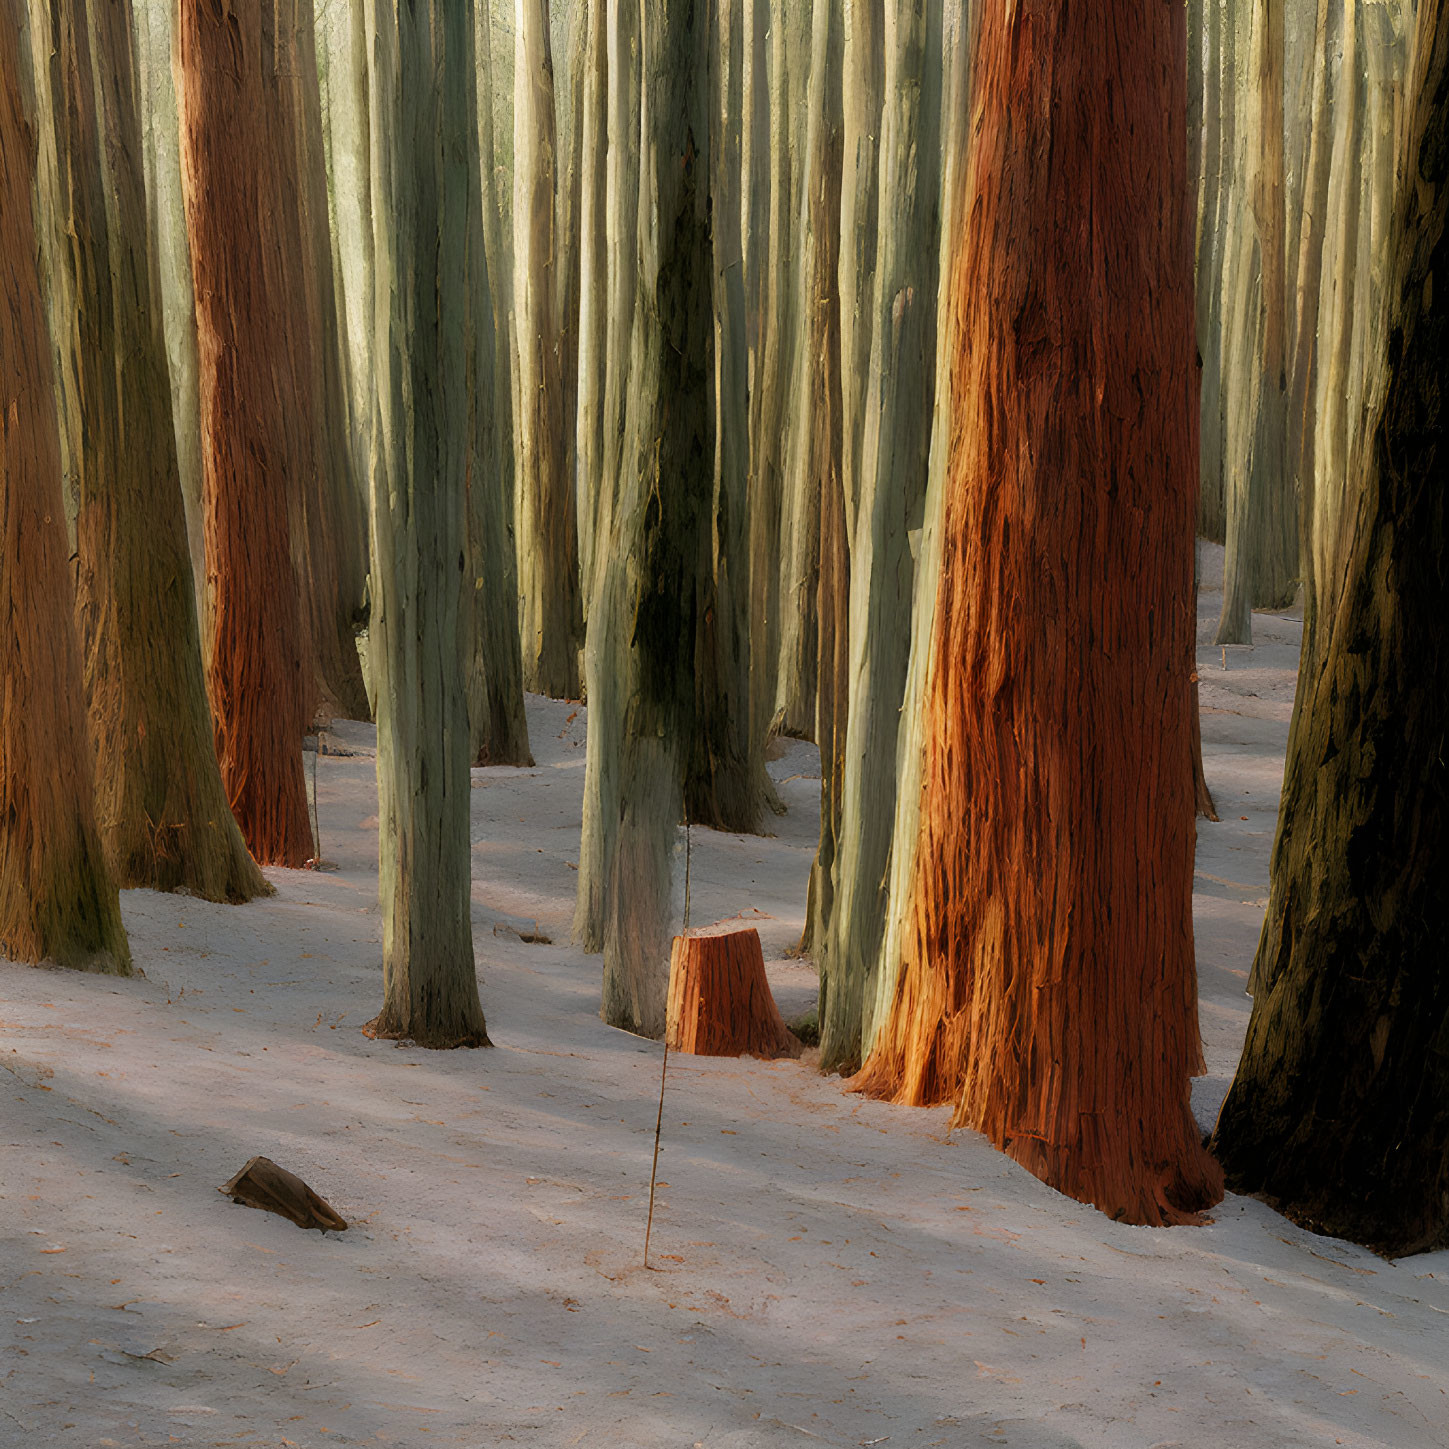 Forest scene: Sunlight filtering through dense trees, highlighting red-barked trunks and contrasting with cooler